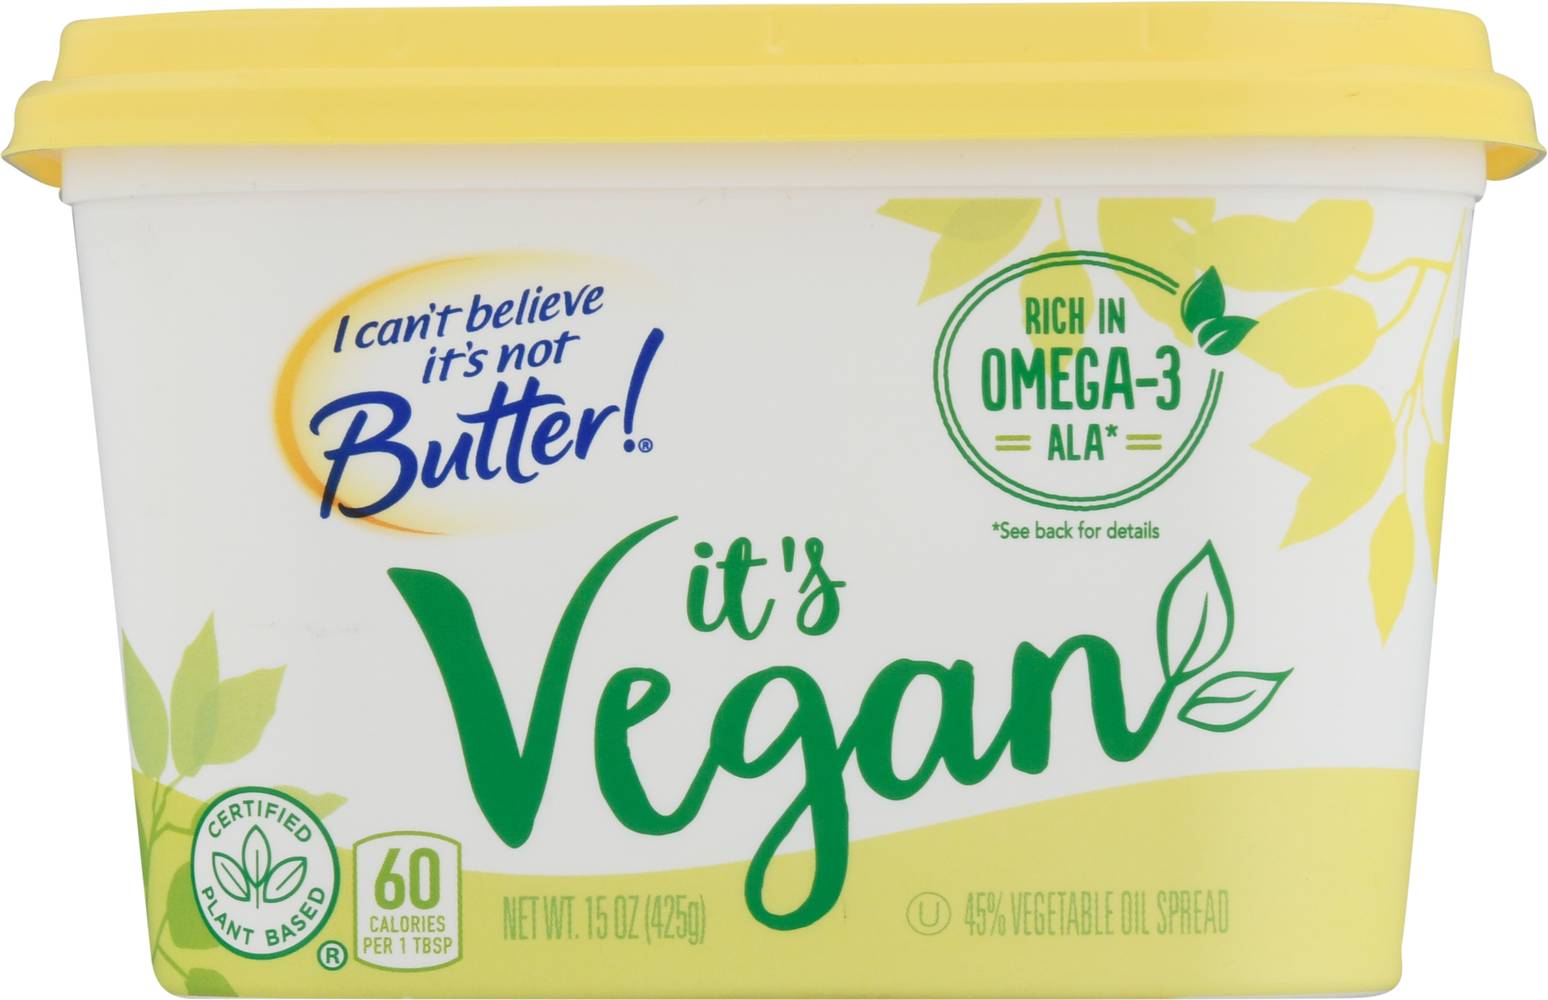 I Can't Believe It's Not Butter! Vegetable Oil Spread